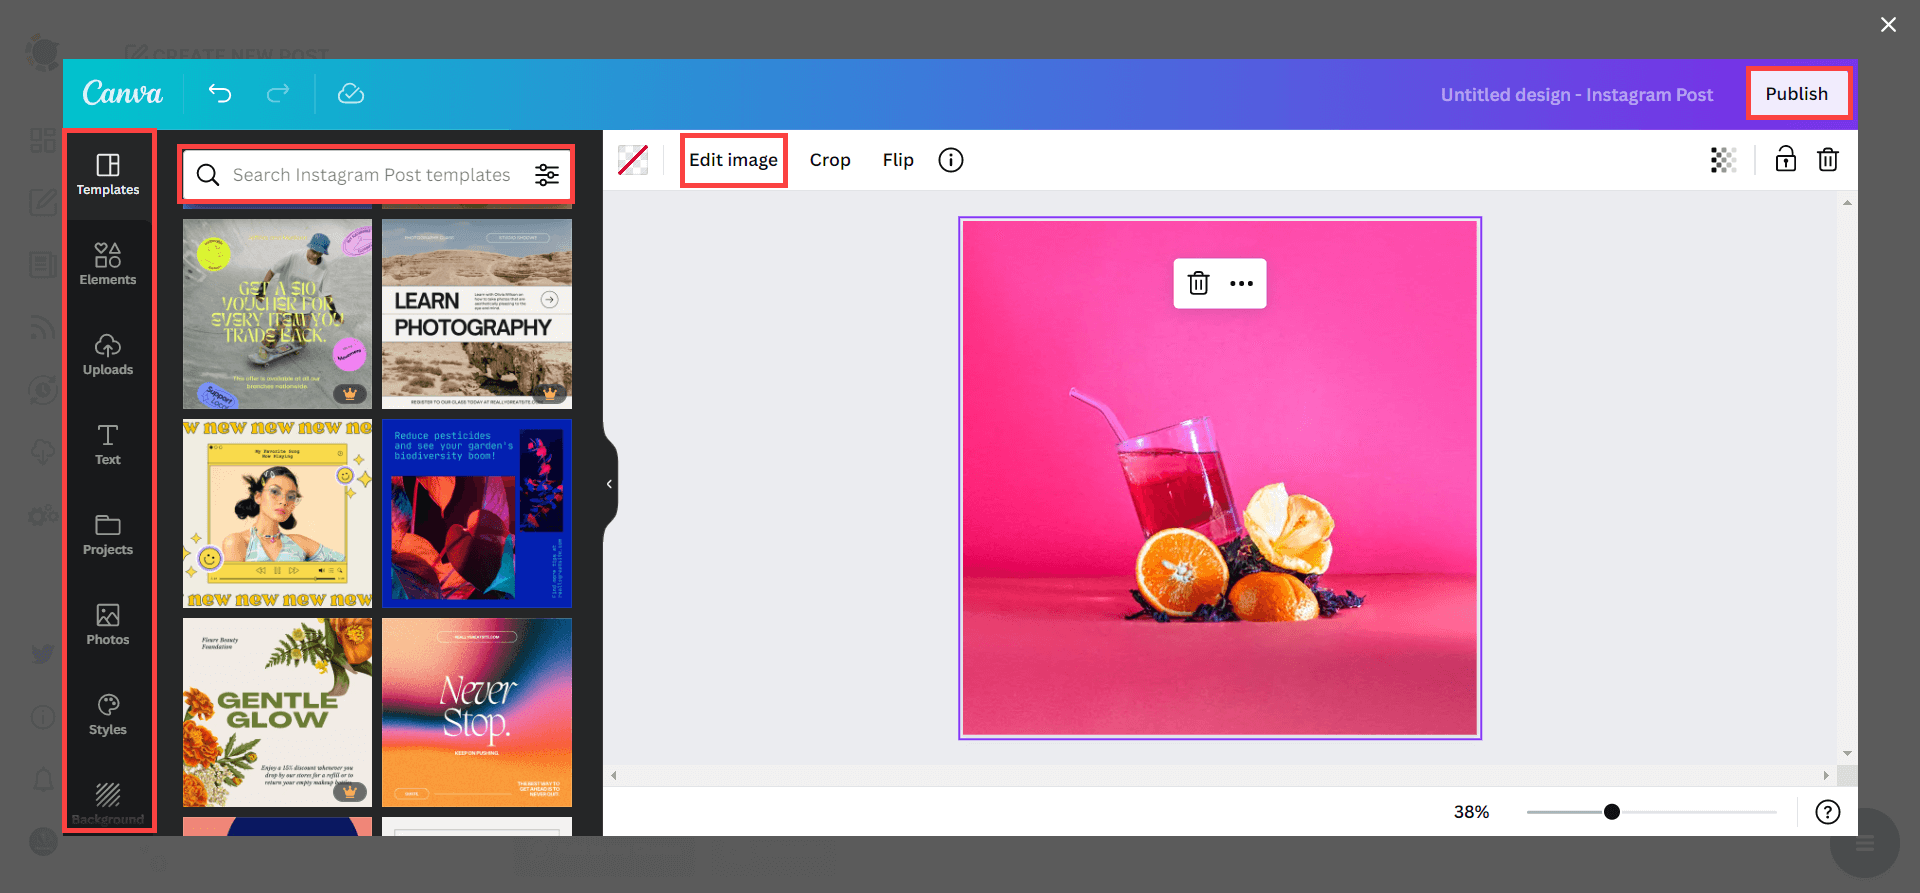 Use Circleboom's built-in Canva to curate and edit images.